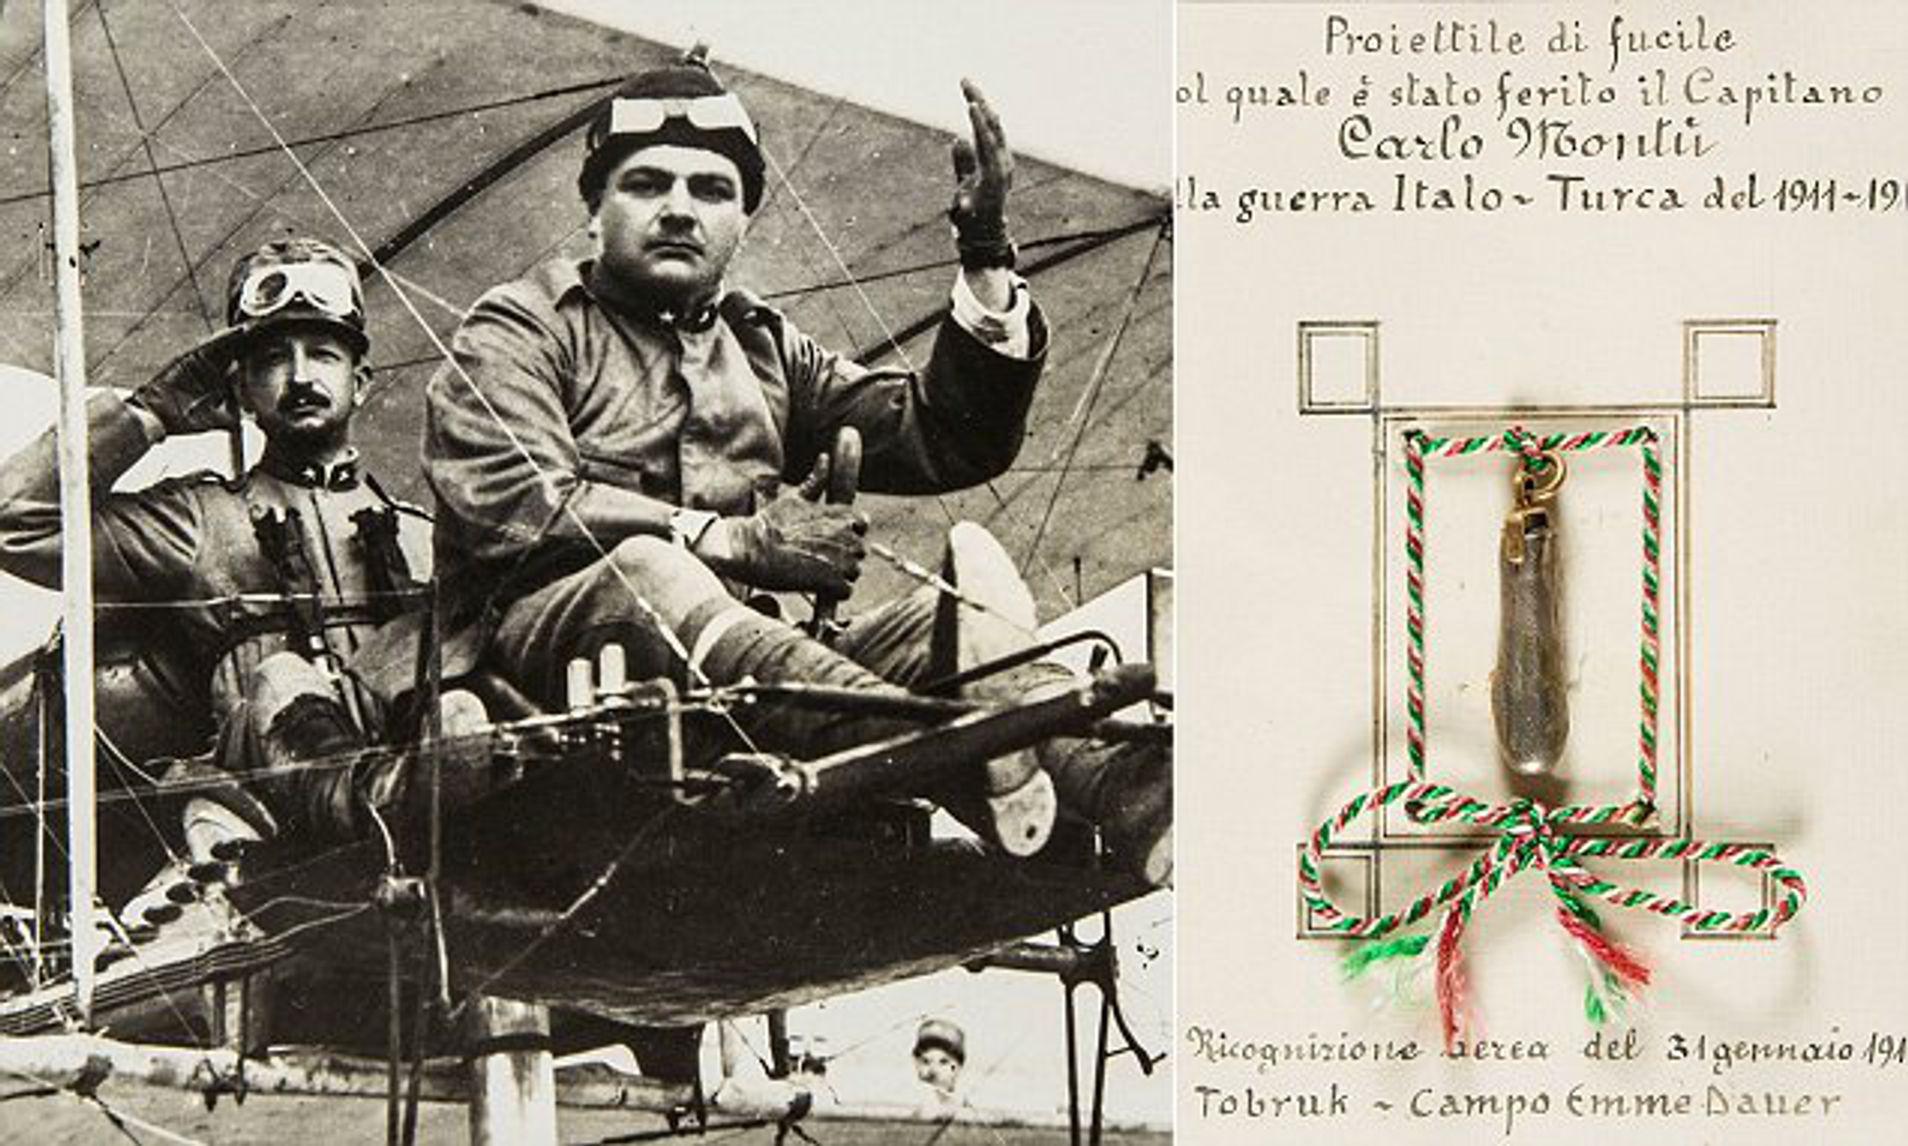 Captain Carlo Montu (front), the first pilot ever to be wounded in combat, he was shot and wounded near Tobruk, Libya during the Italian-Turkish War in 1912.jpg